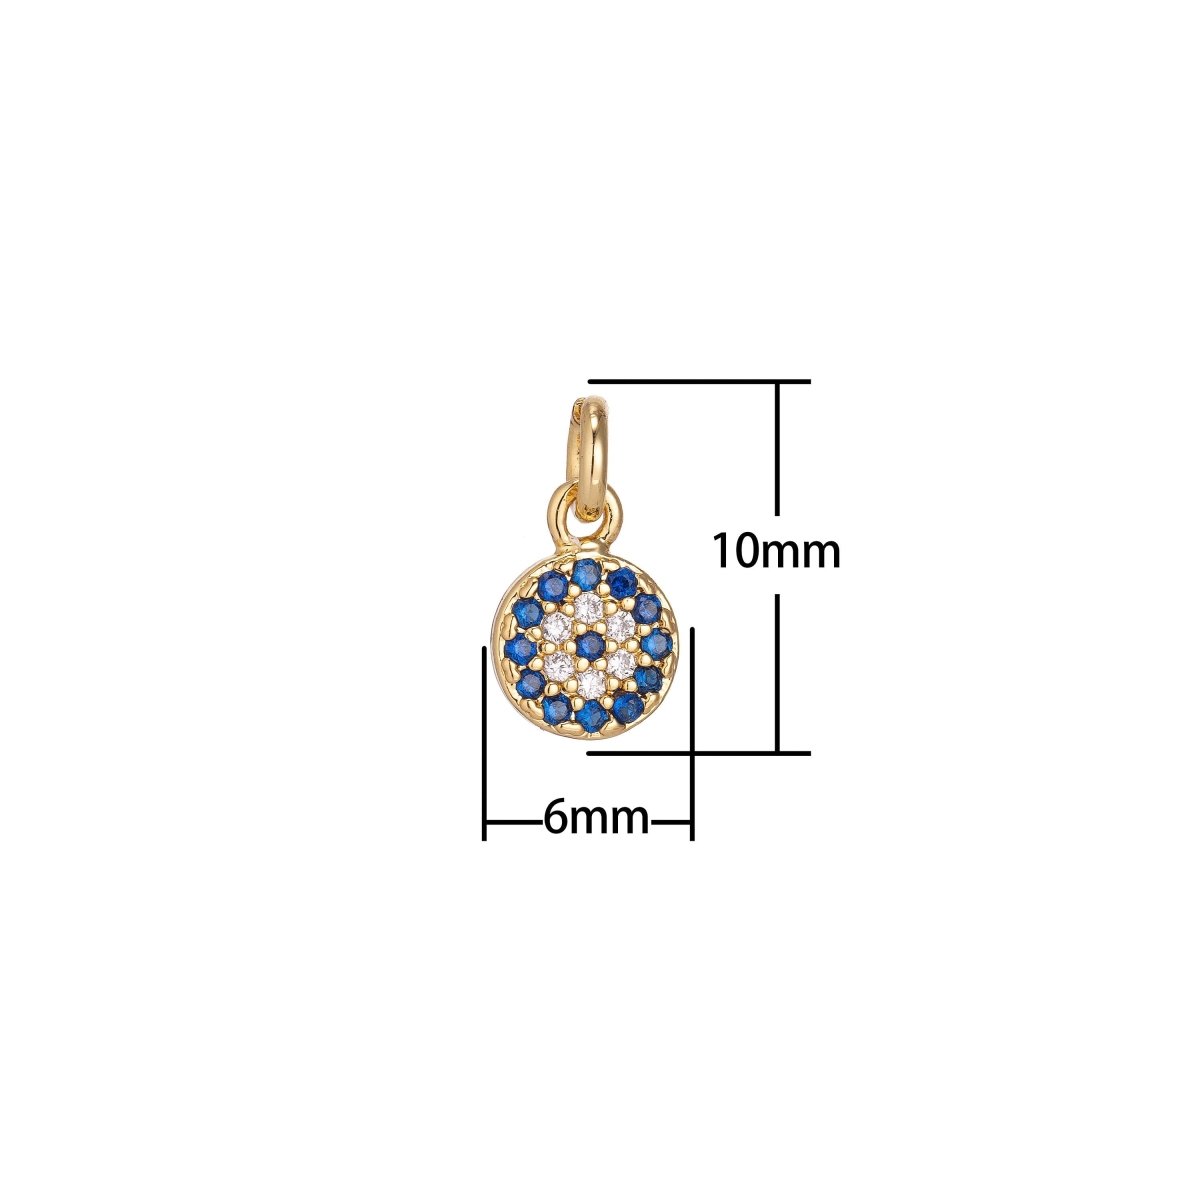 Products Dainty Tiny 18k Gold Fill / White Gold Coin Round Charm Pave CZ Cubic Zirconia pendant for Earring, Necklace, Bracelet Jewelry Making Supply C-160 - DLUXCA